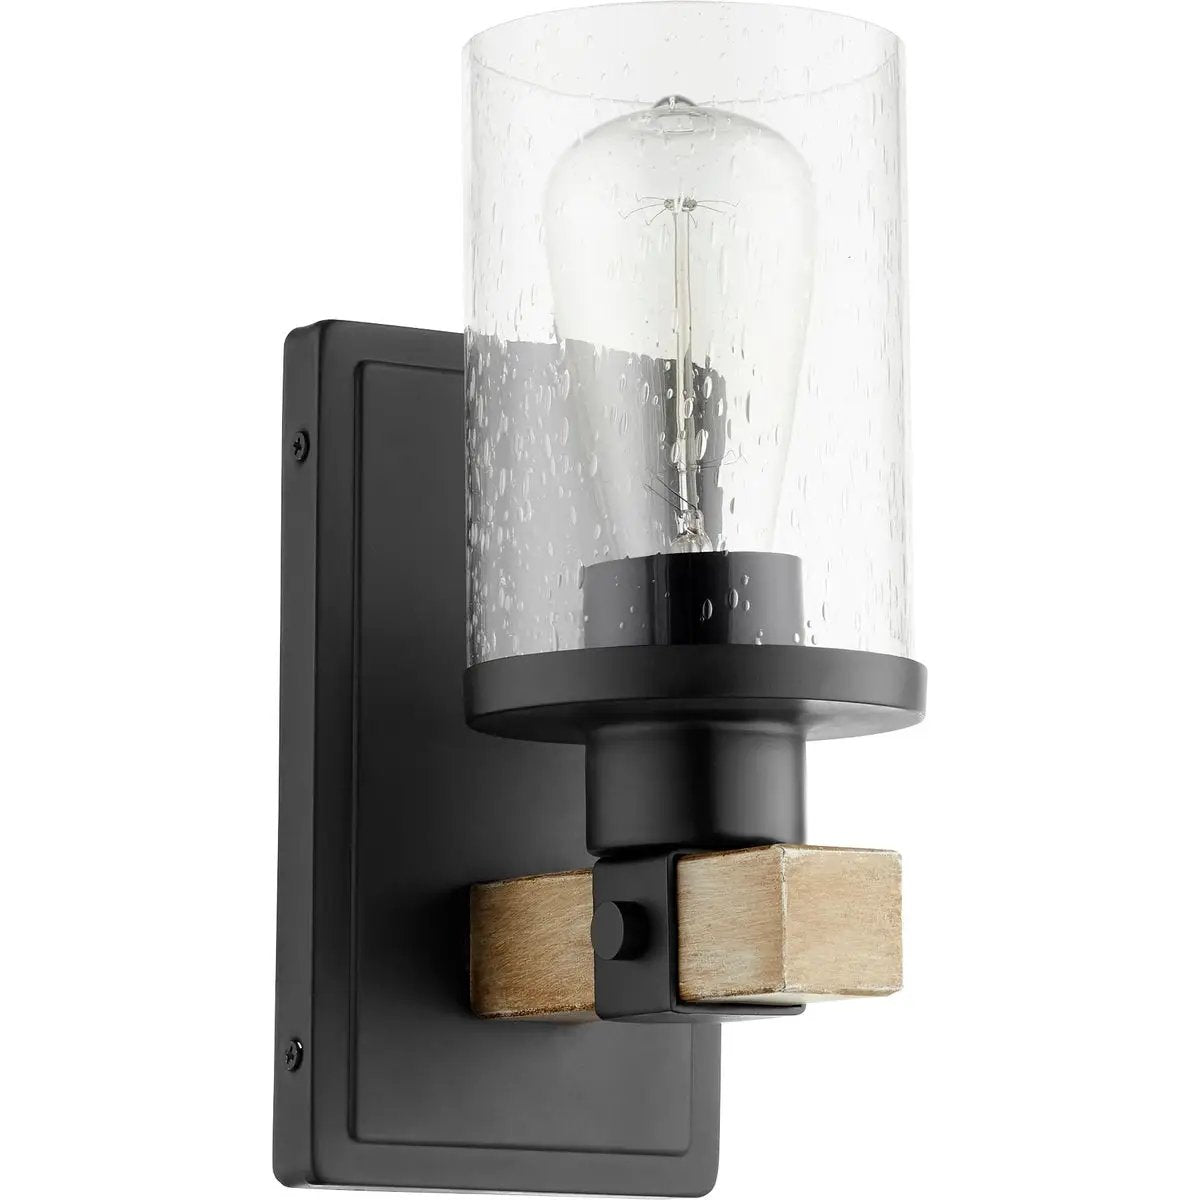 A modern farmhouse wall sconce with a clear glass diffuser, perfect for rustic style applications.